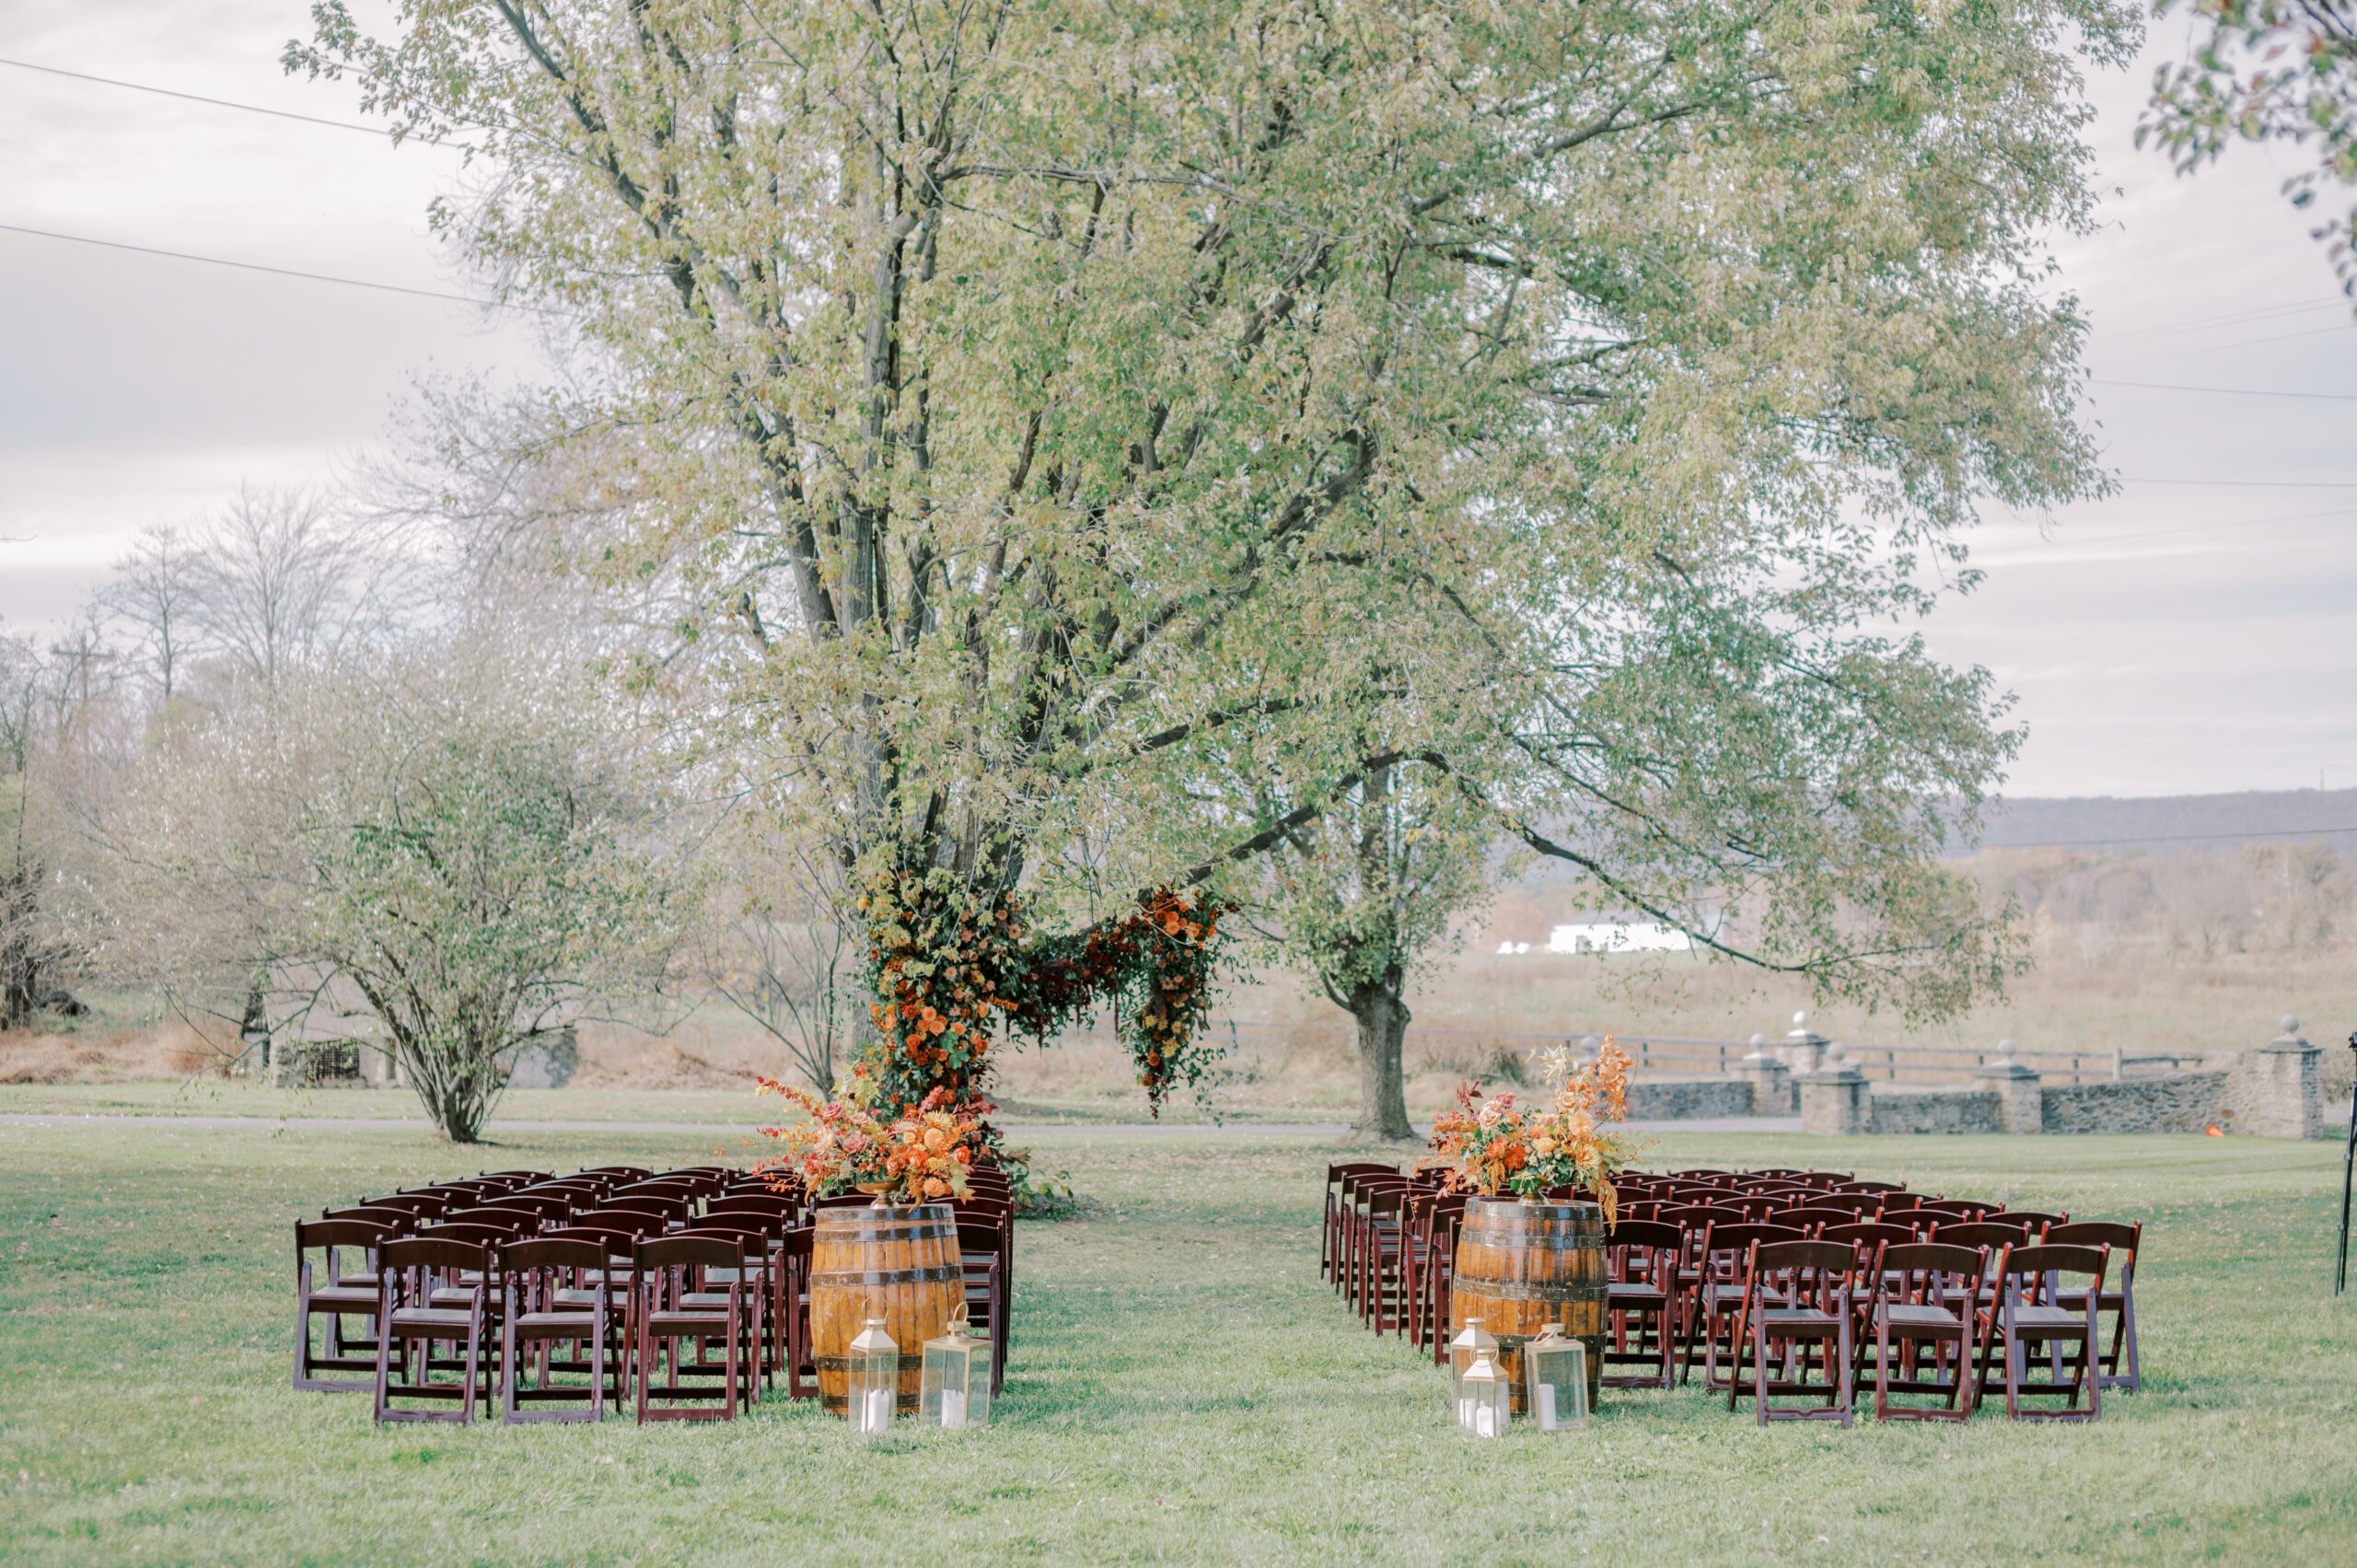 Photo of ceremony spot at the manor at airmont, dark wooden chair, a tree with hanging florals, and barrels with more floral arrangements